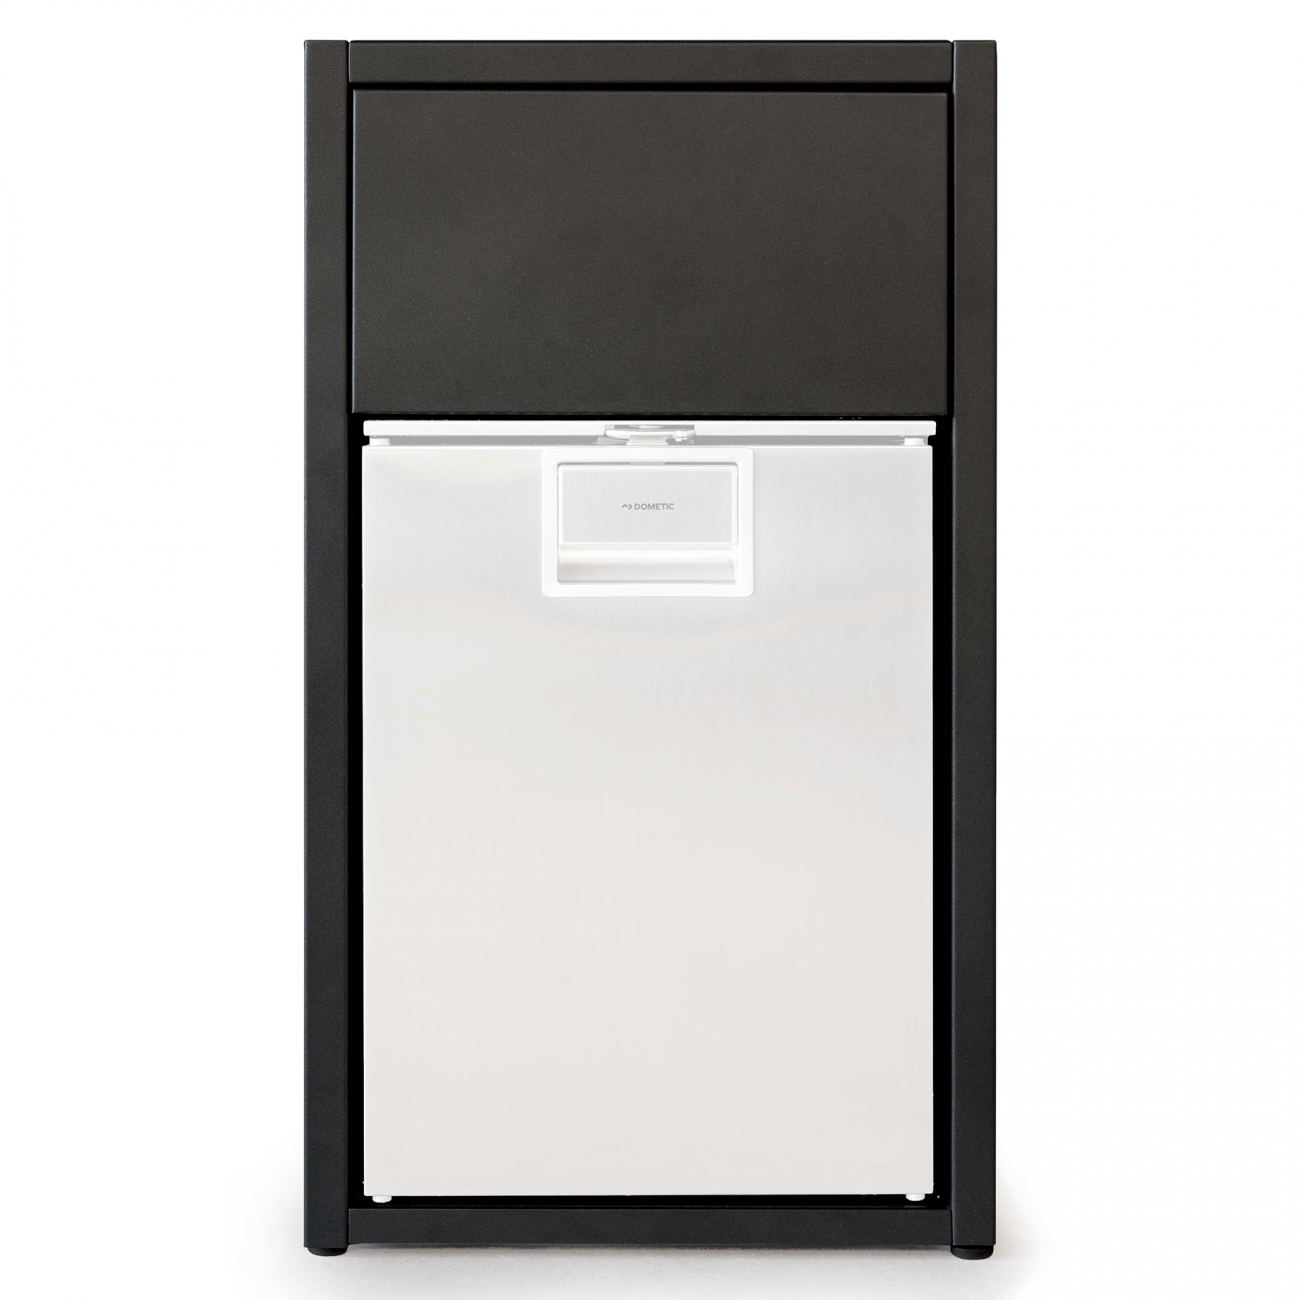 Röshults Open Kitchen Cabinet f. Fridge 50 Brushed Stainless Steel